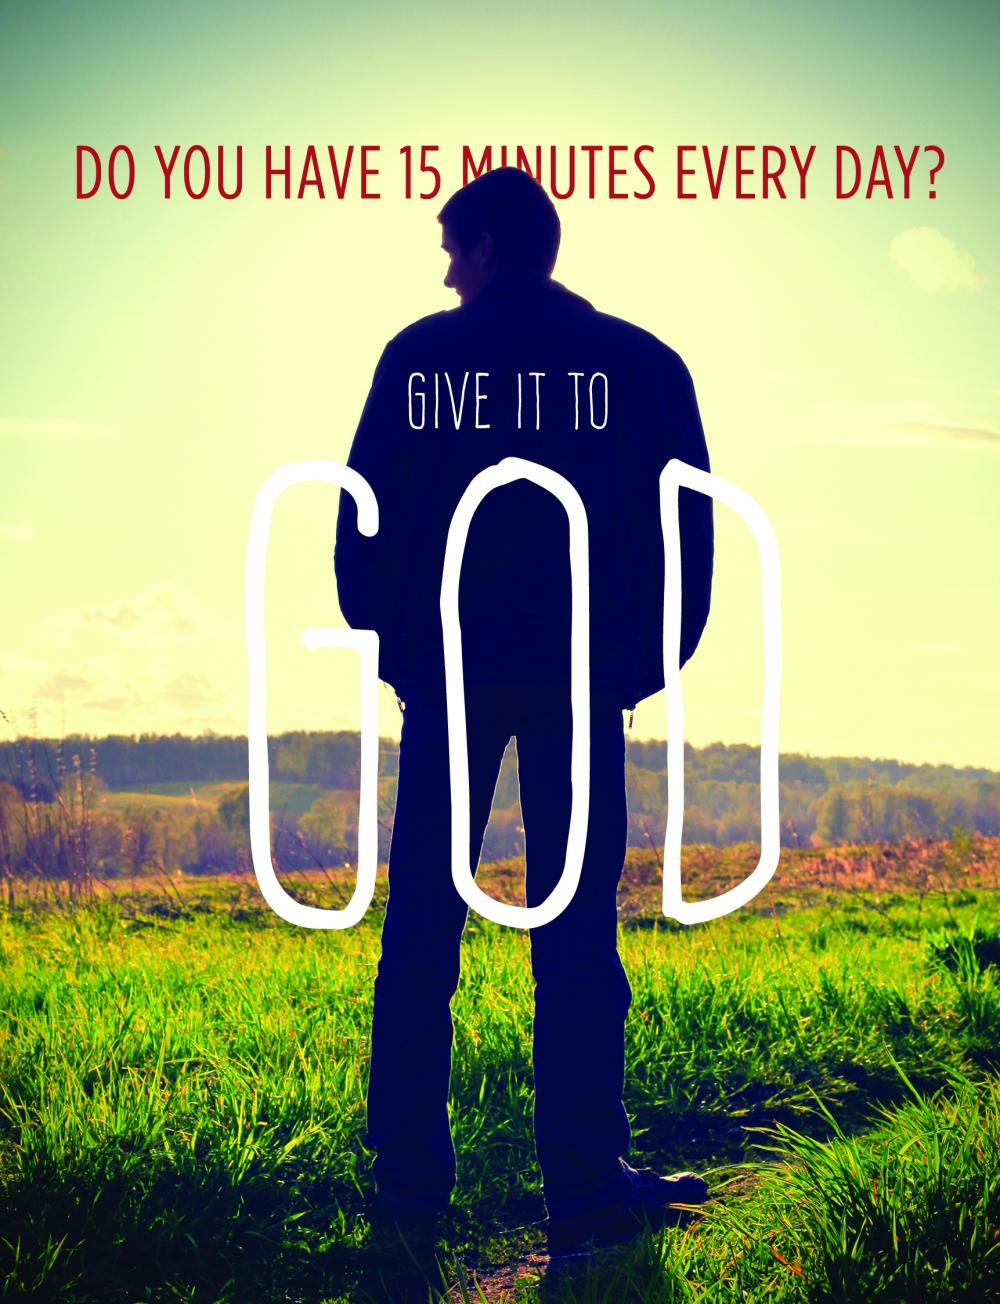 Do you have 15 minutes every day? Give it to God